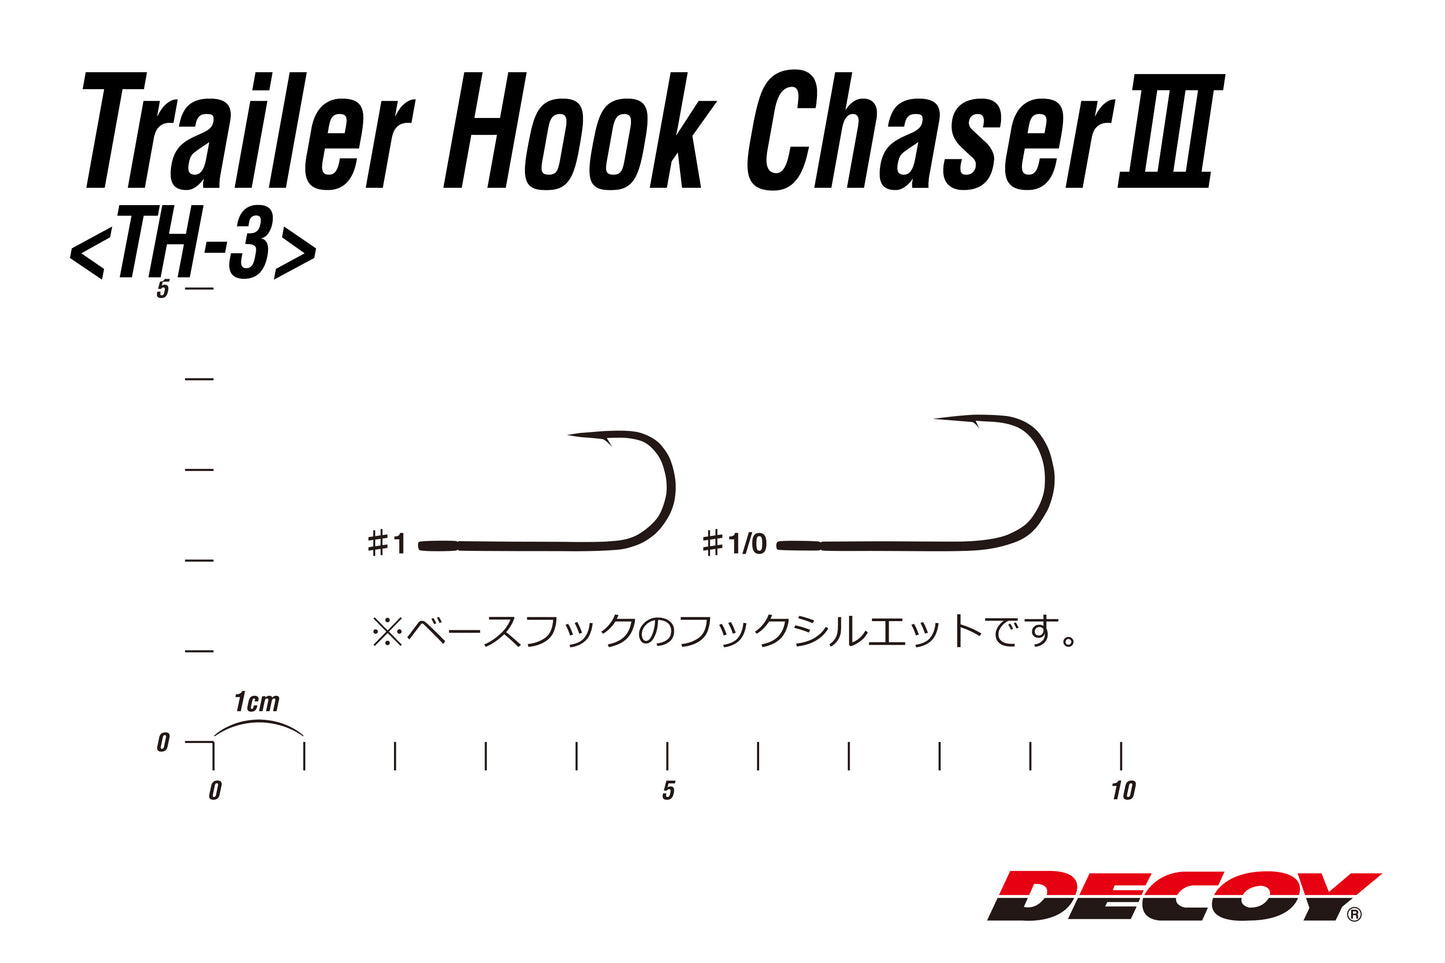 TH-3C Trailer Hook Chaser III